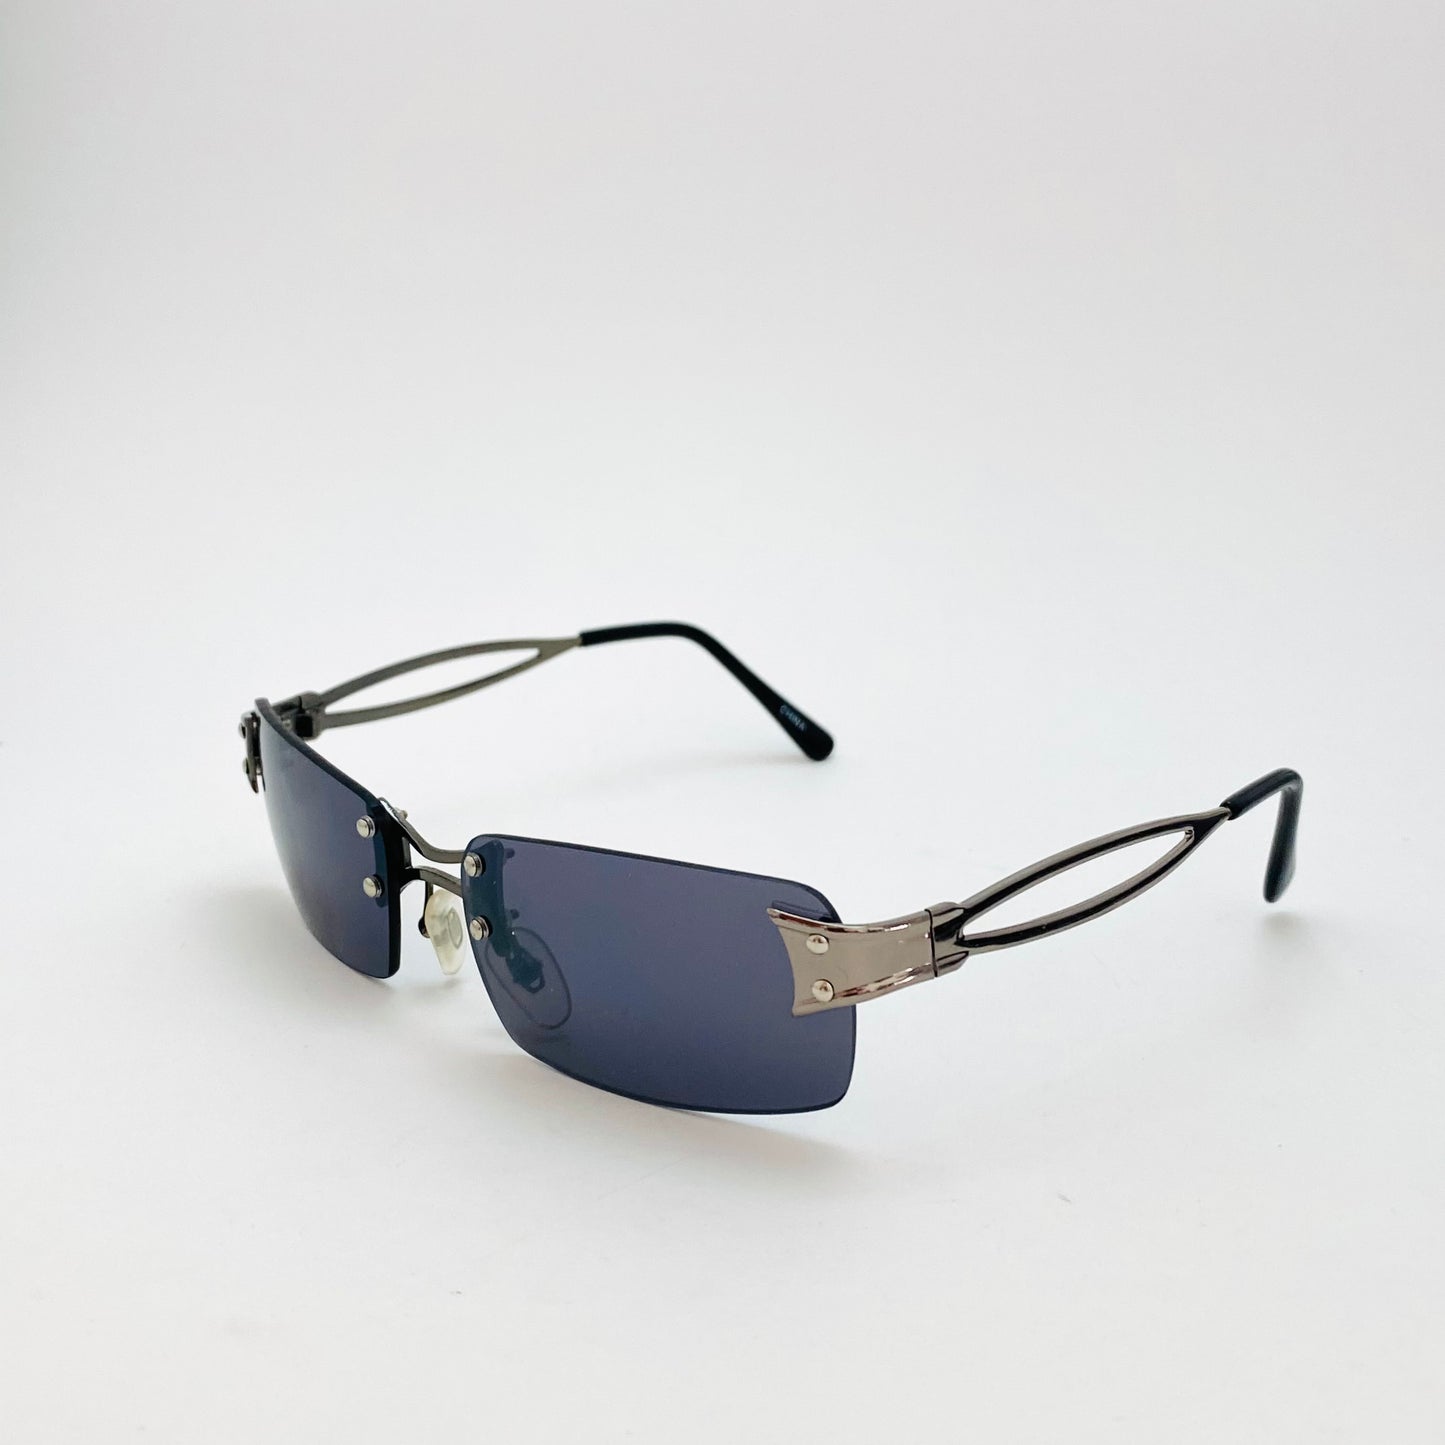 mod style, colored lens, wire frame, deadstock sunglasses with metal